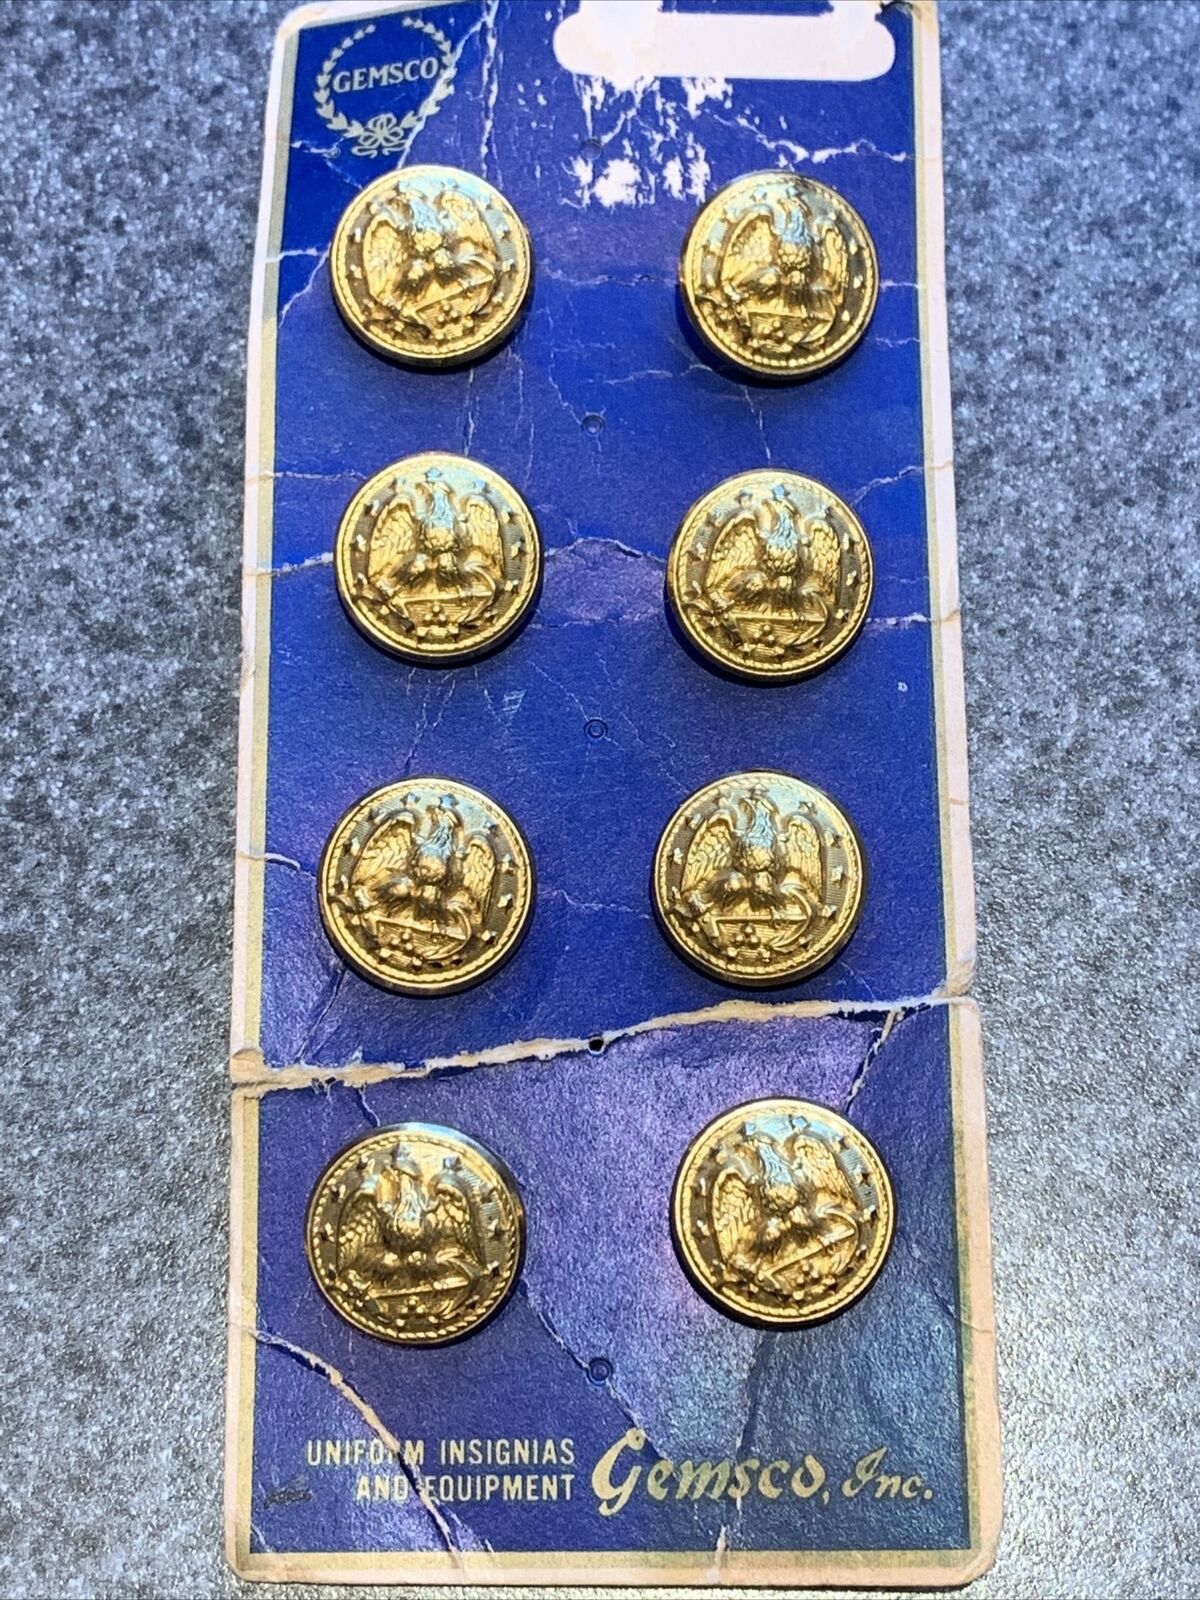 Vintage Gemsco Military Uniform Buttons Set Of 8 Eagle Gold Tone New on Card